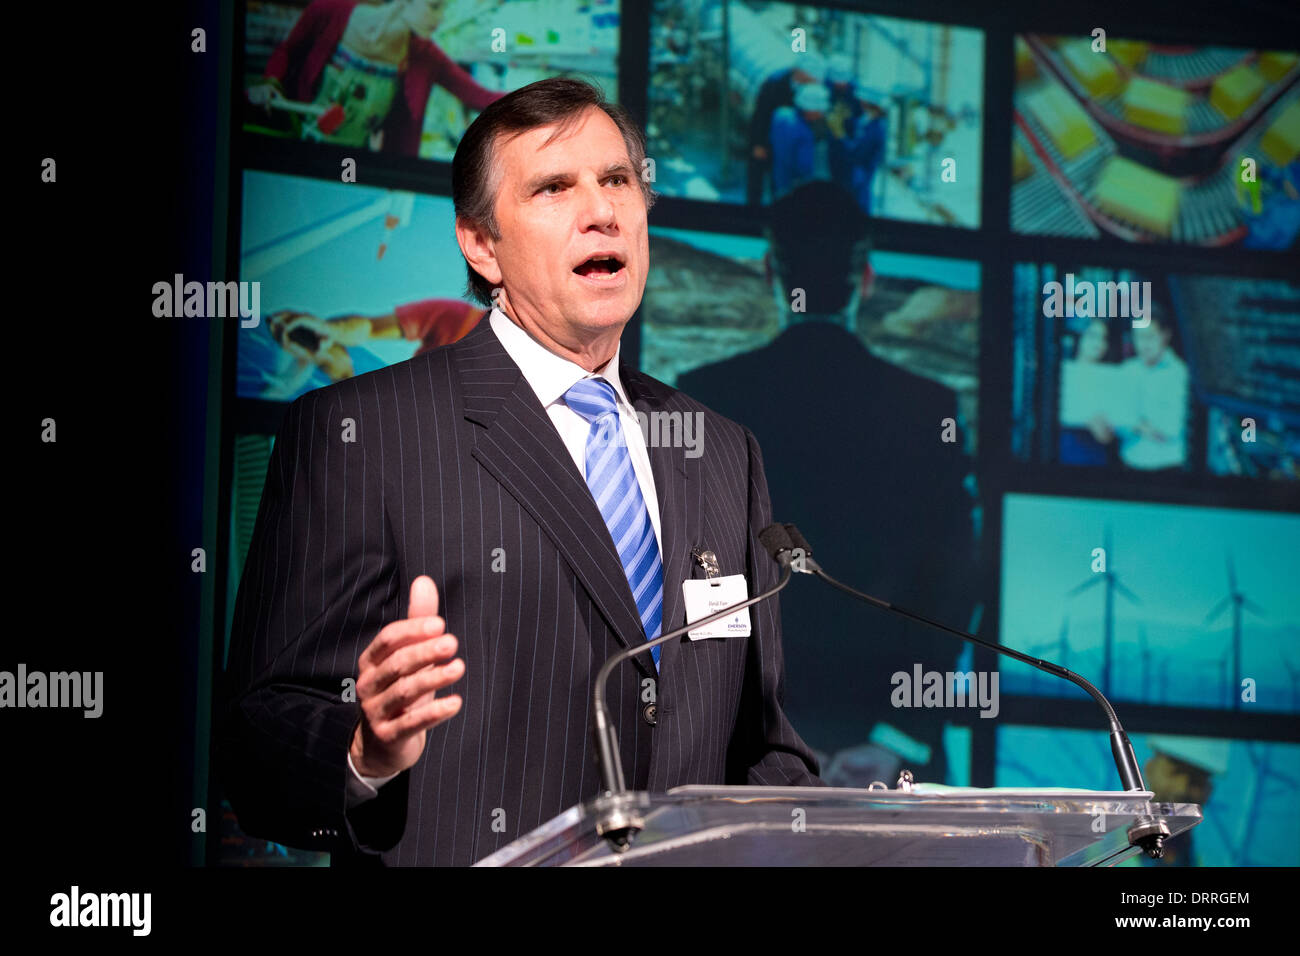 Emerson CEO David Farr speaks at the grand opening of the company's Innovations Center in Round Rock, Texas. Stock Photo